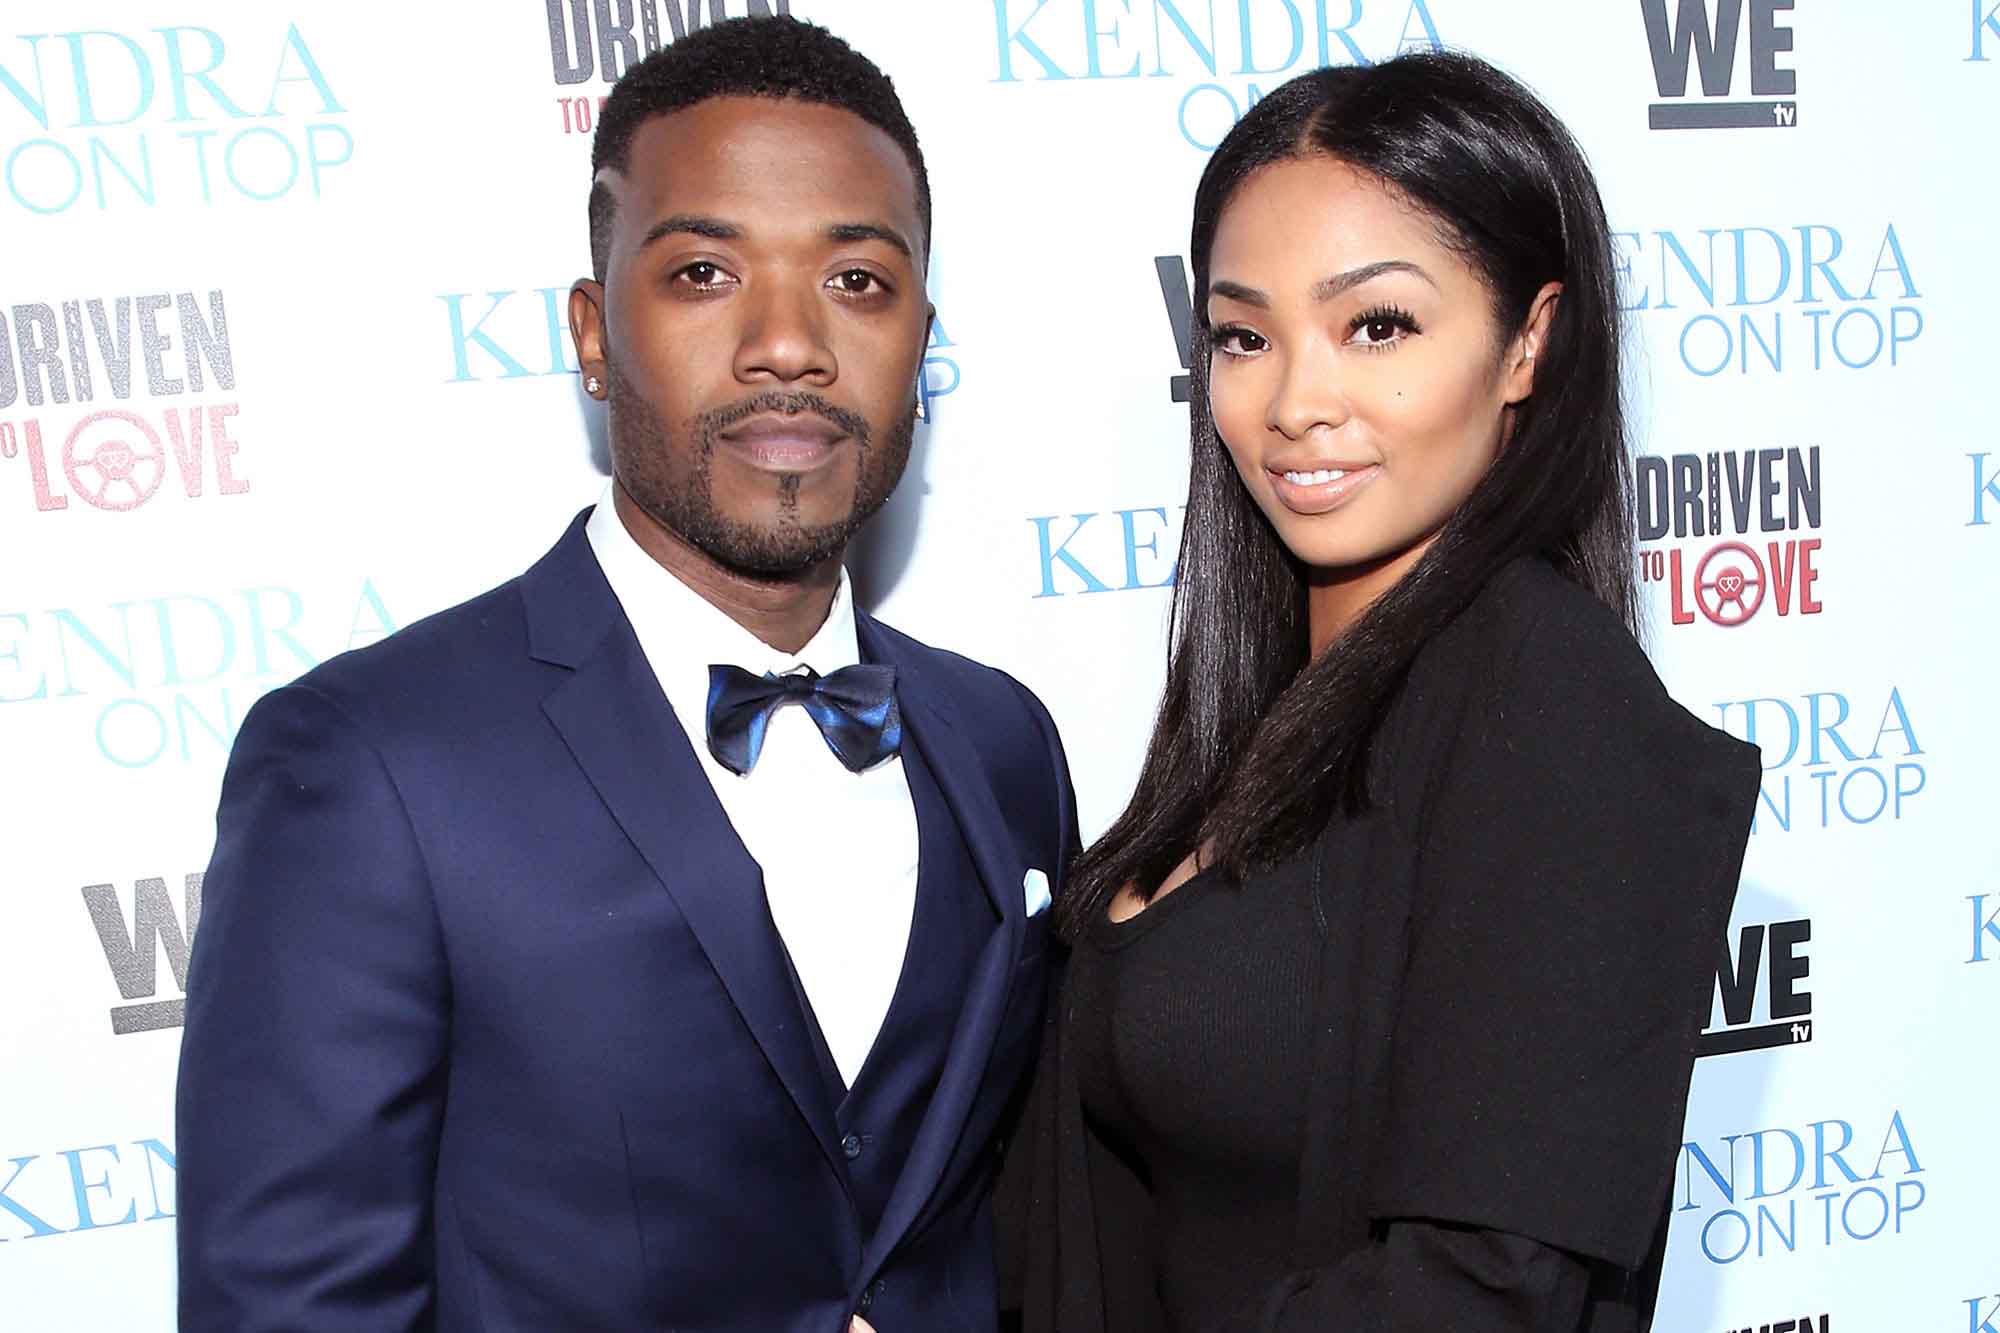 Is Ray J going to lose his net worth because of his divorce? Film Daily